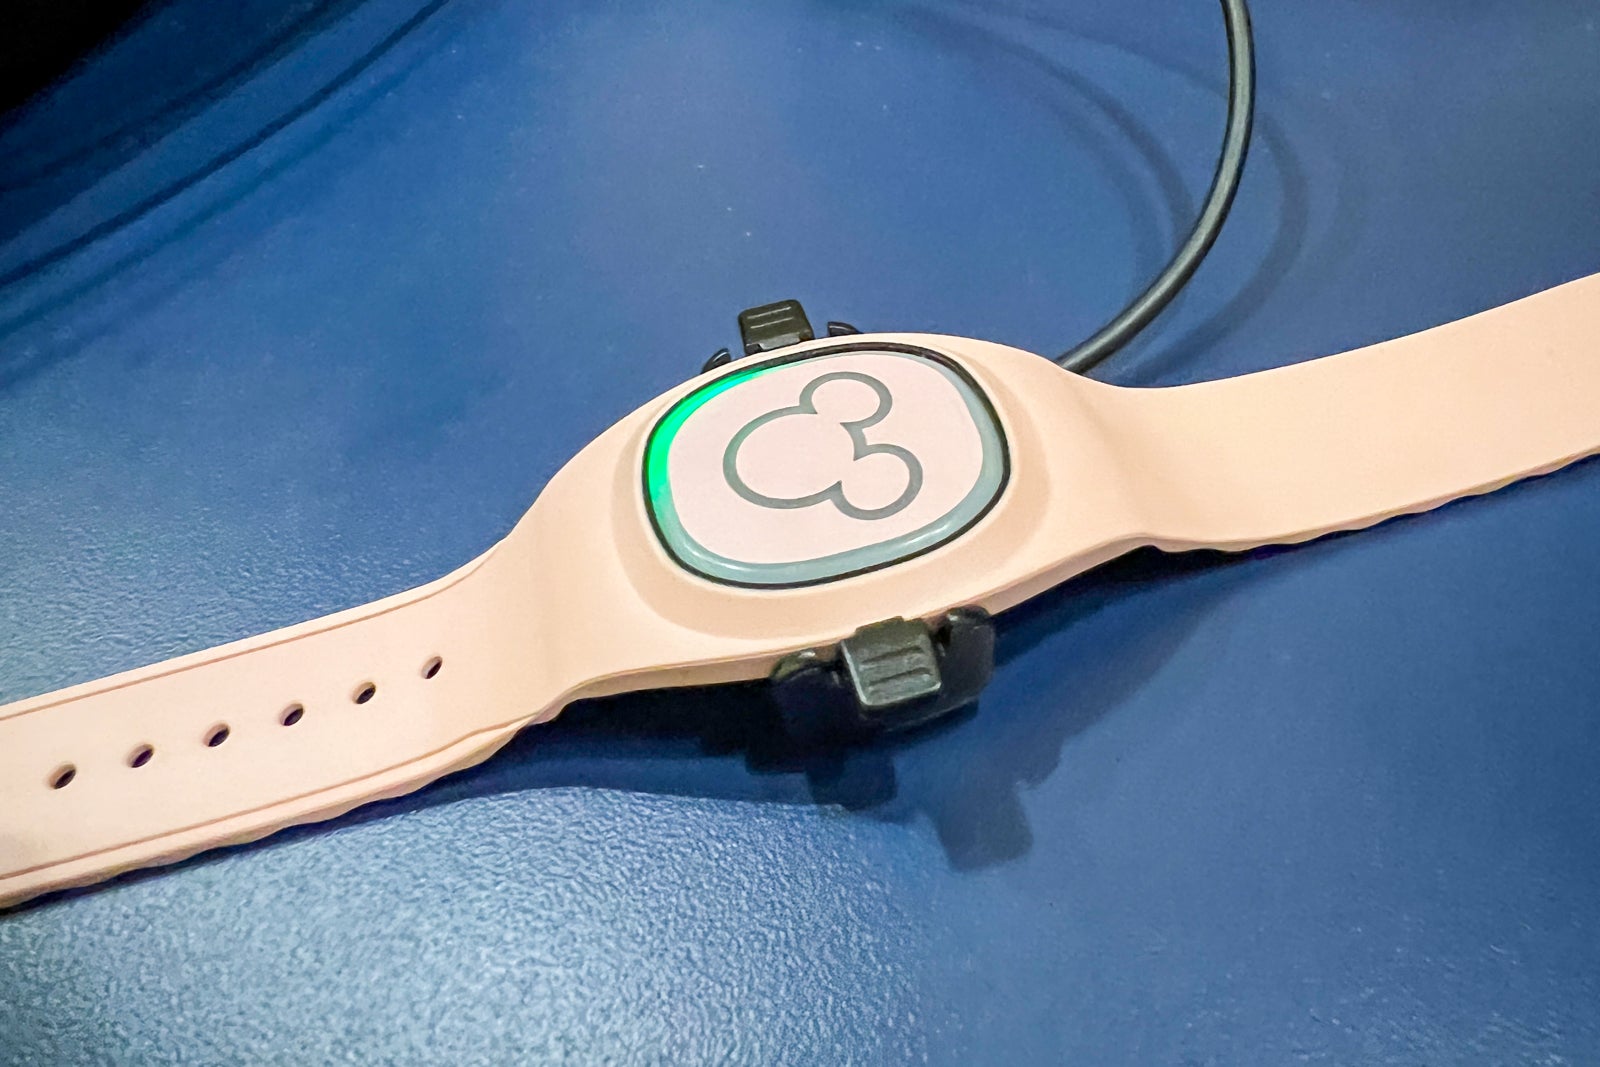 Disneyland's MagicBand Plus Wearable Arrives Oct. 26 - CNET